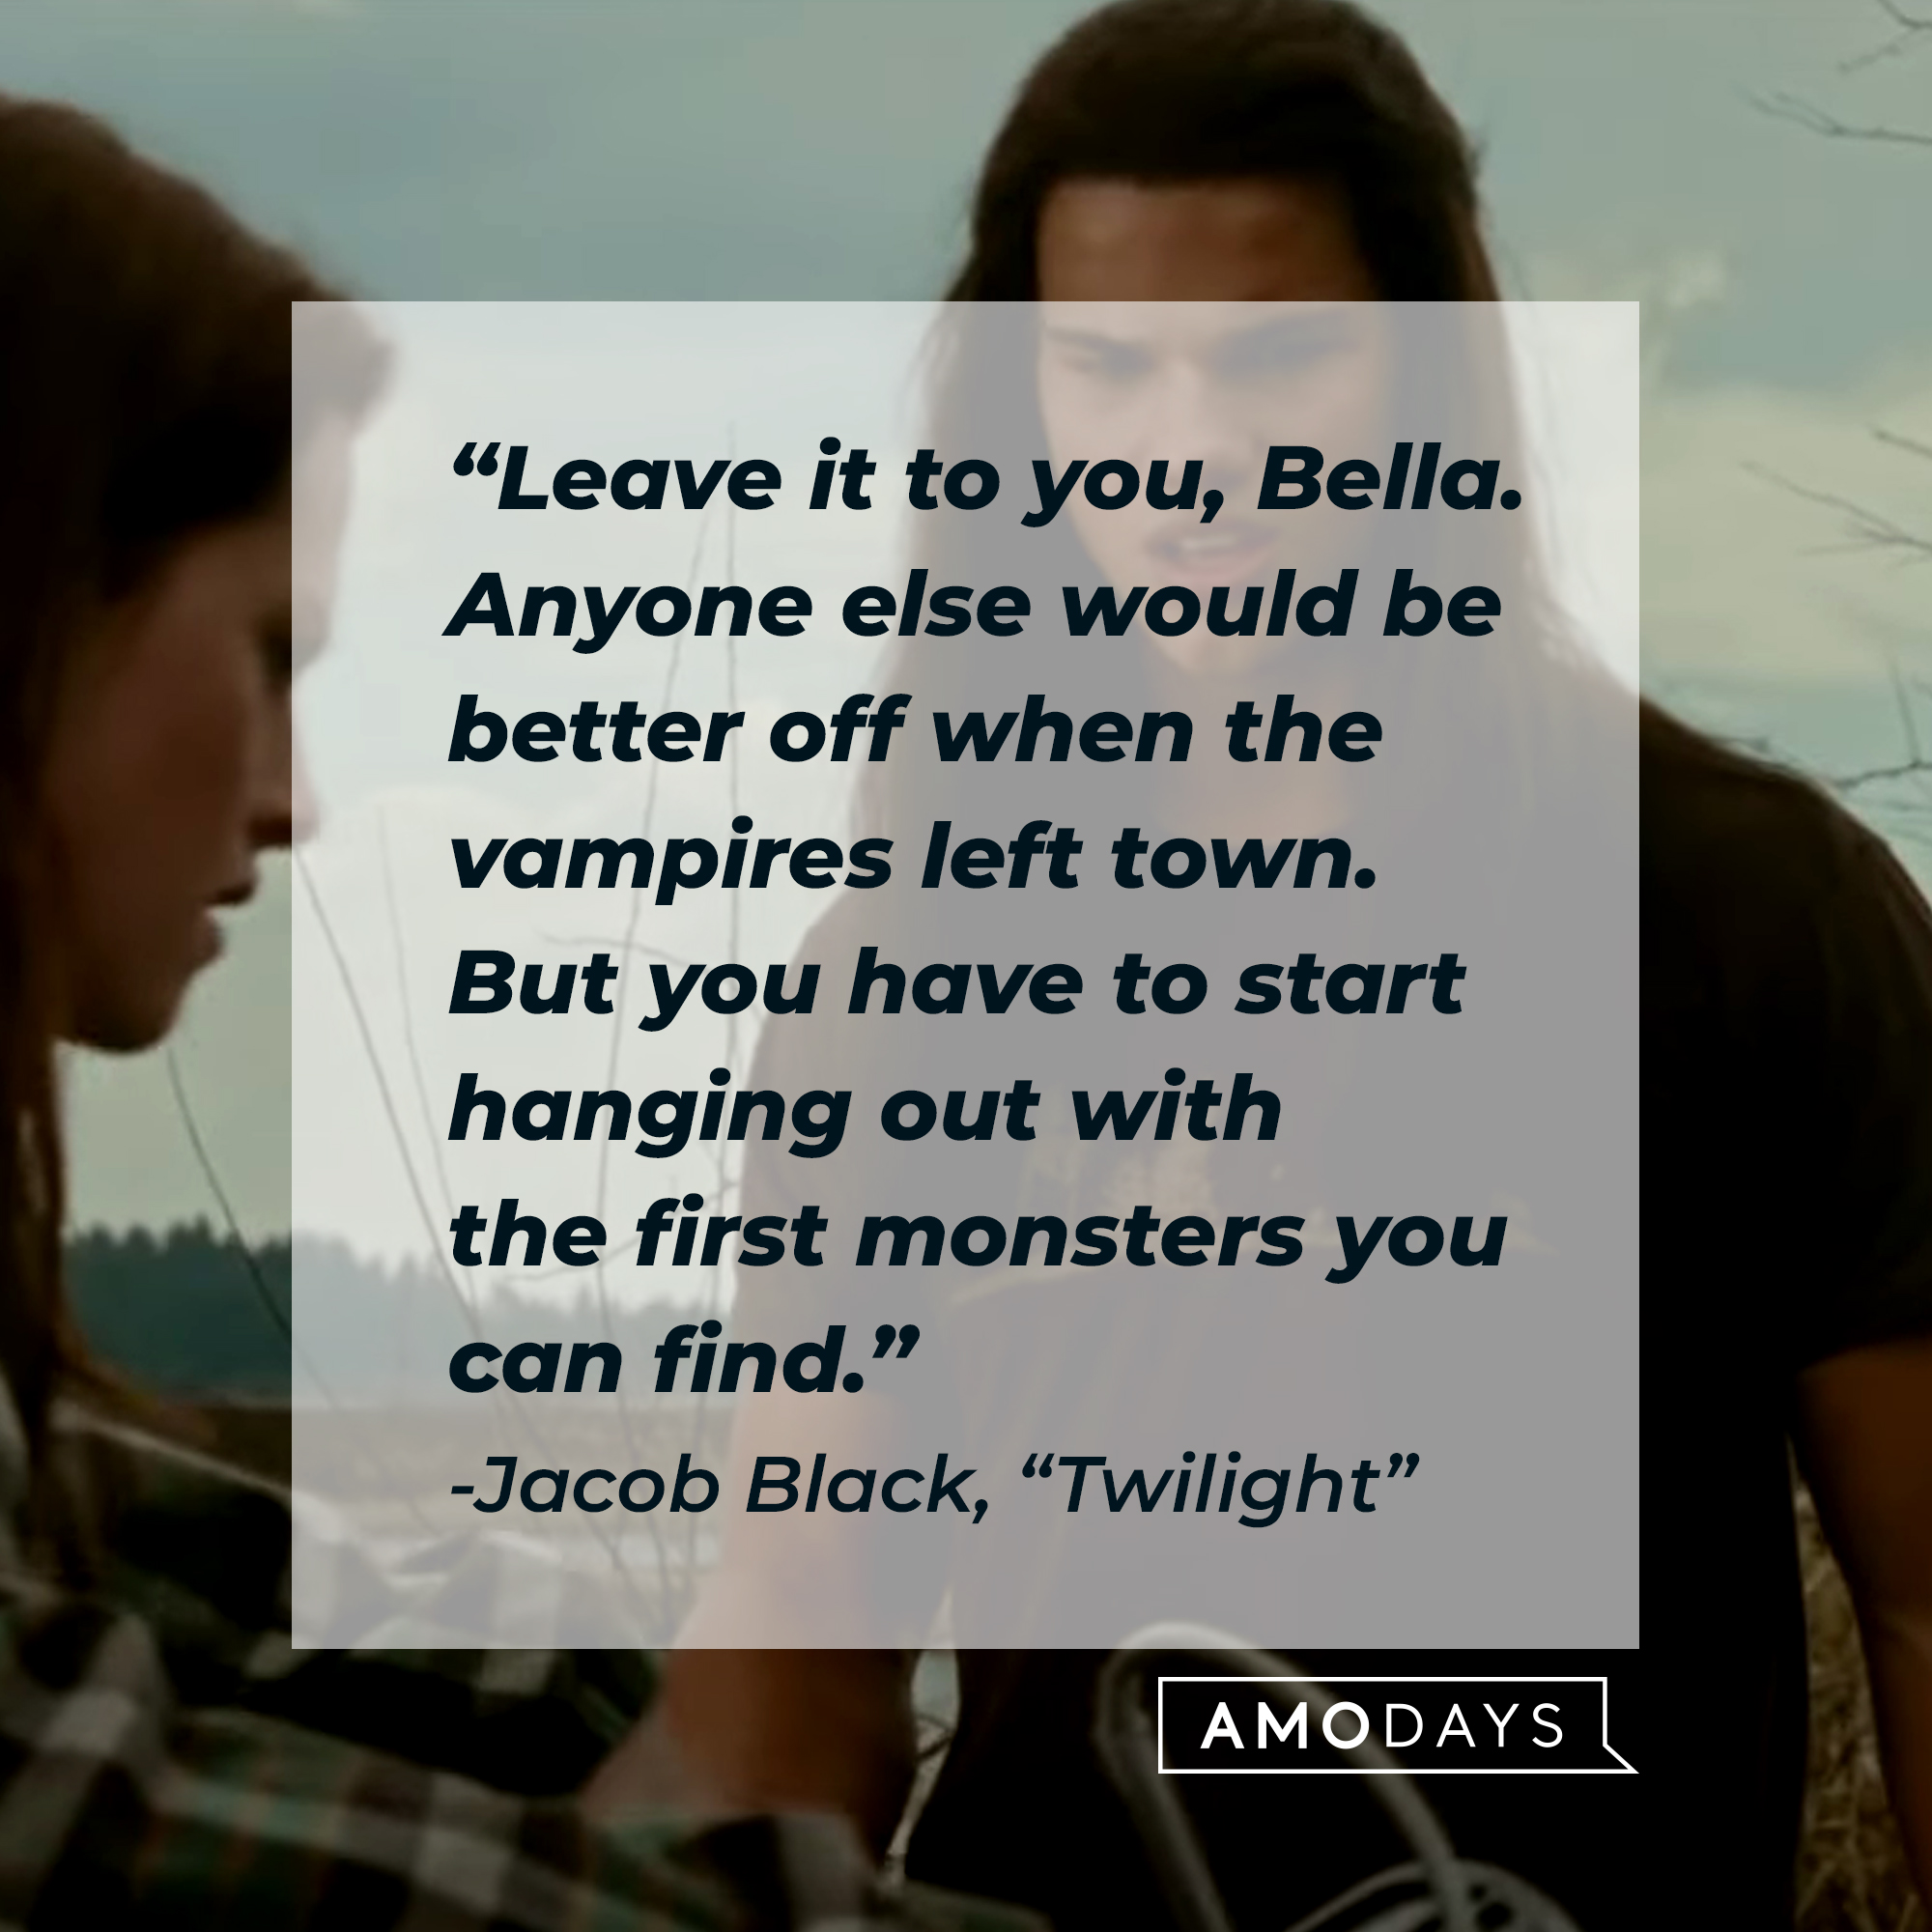 Image of Jacob Black with his quote in "Twilight:" “Leave it to you, Bella. Anyone else would be better off when the vampires left town. But you have to start hanging out with the first monsters you can find.” | Source: Facebook.com/twilight